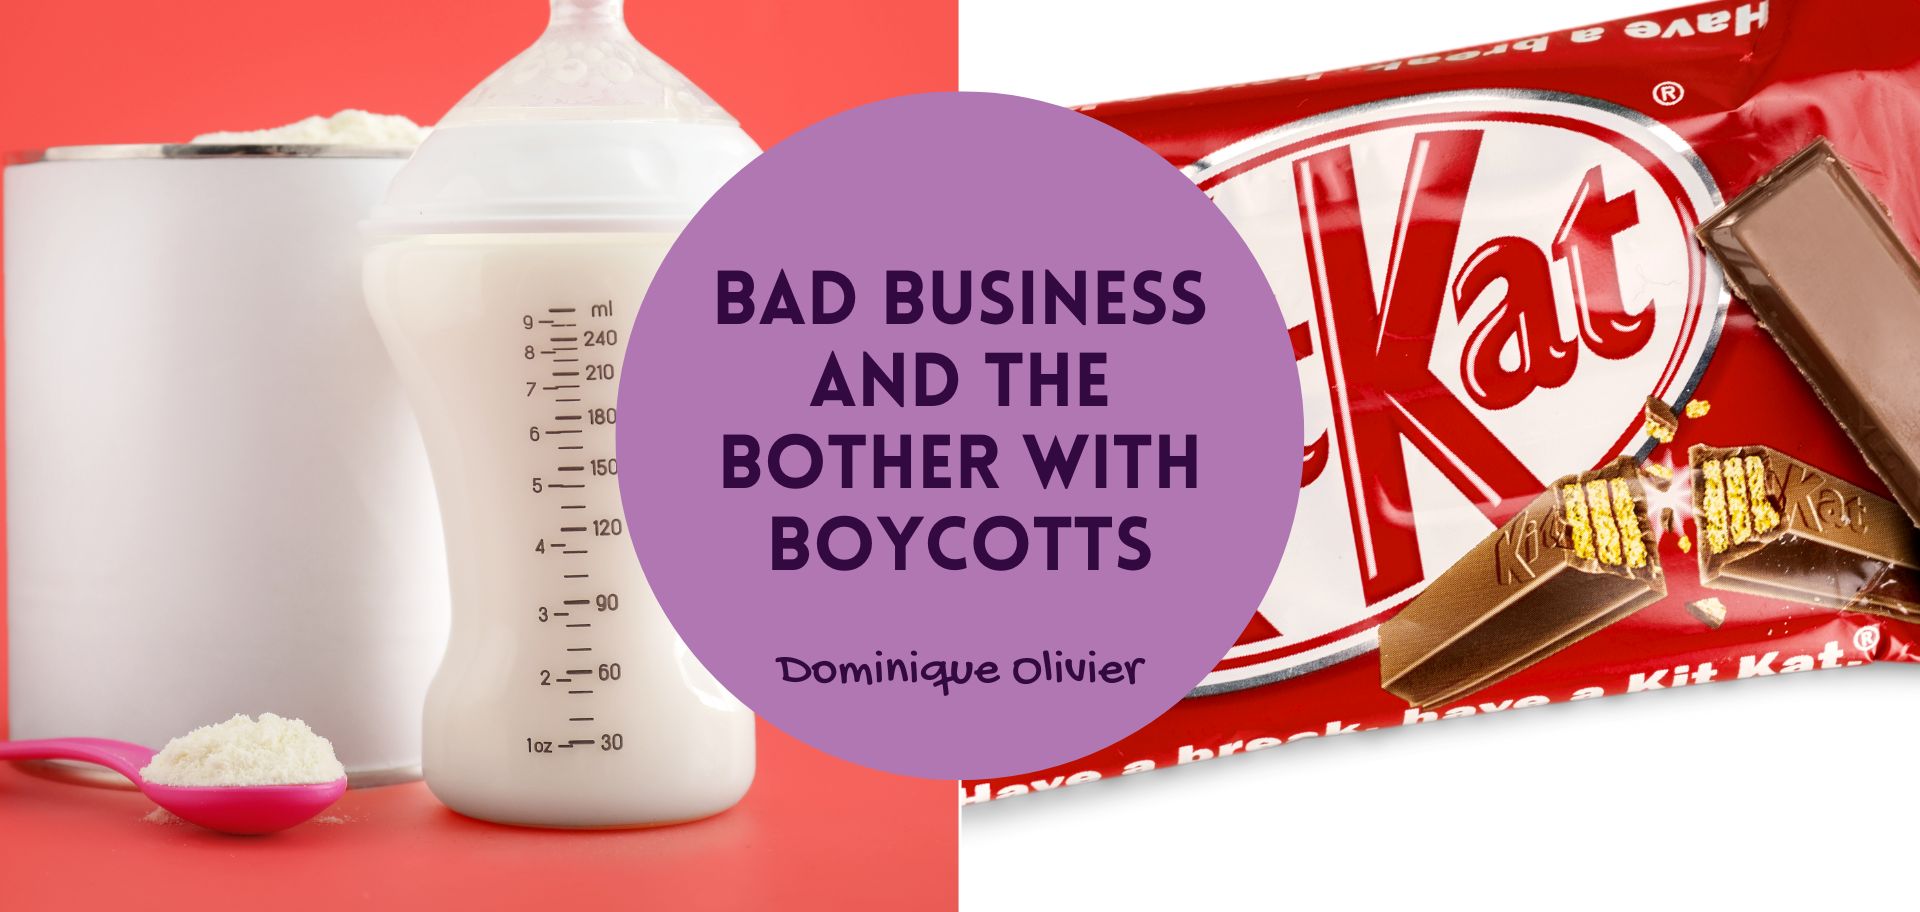 Bad business and the bother with boycotts